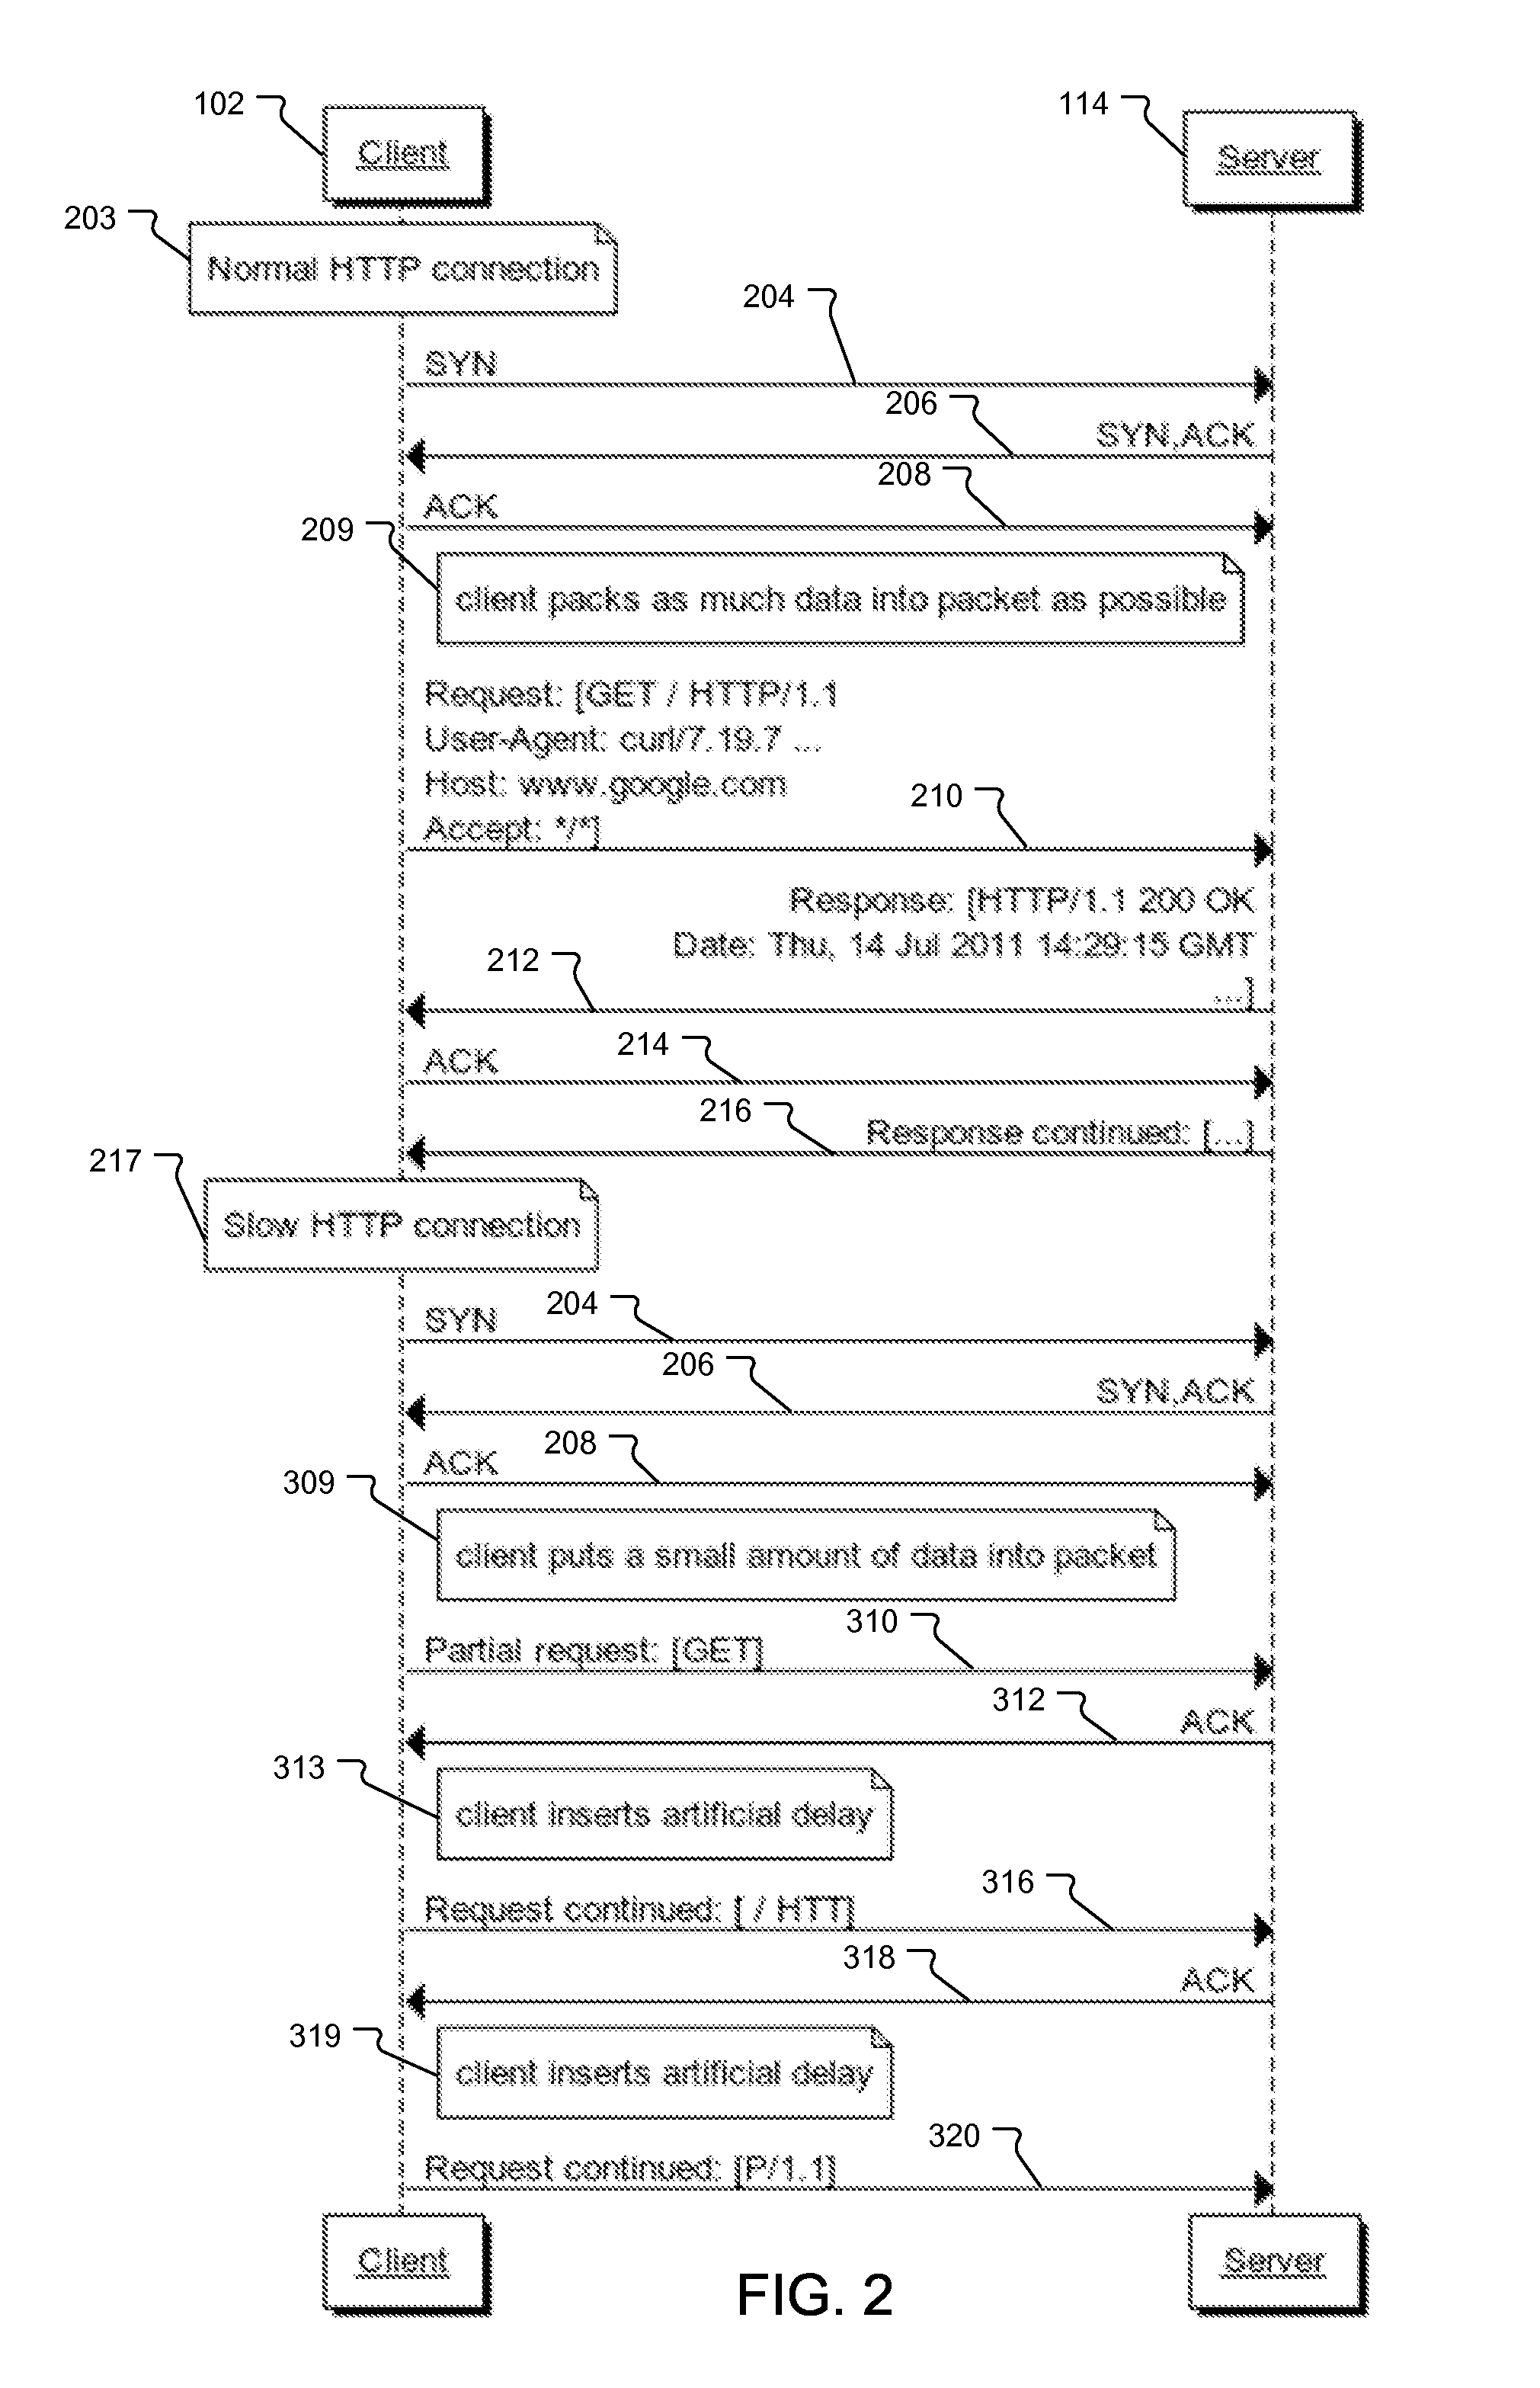 Method and Protection System for Mitigating Slow HTTP Attacks Using Rate and Time Monitoring